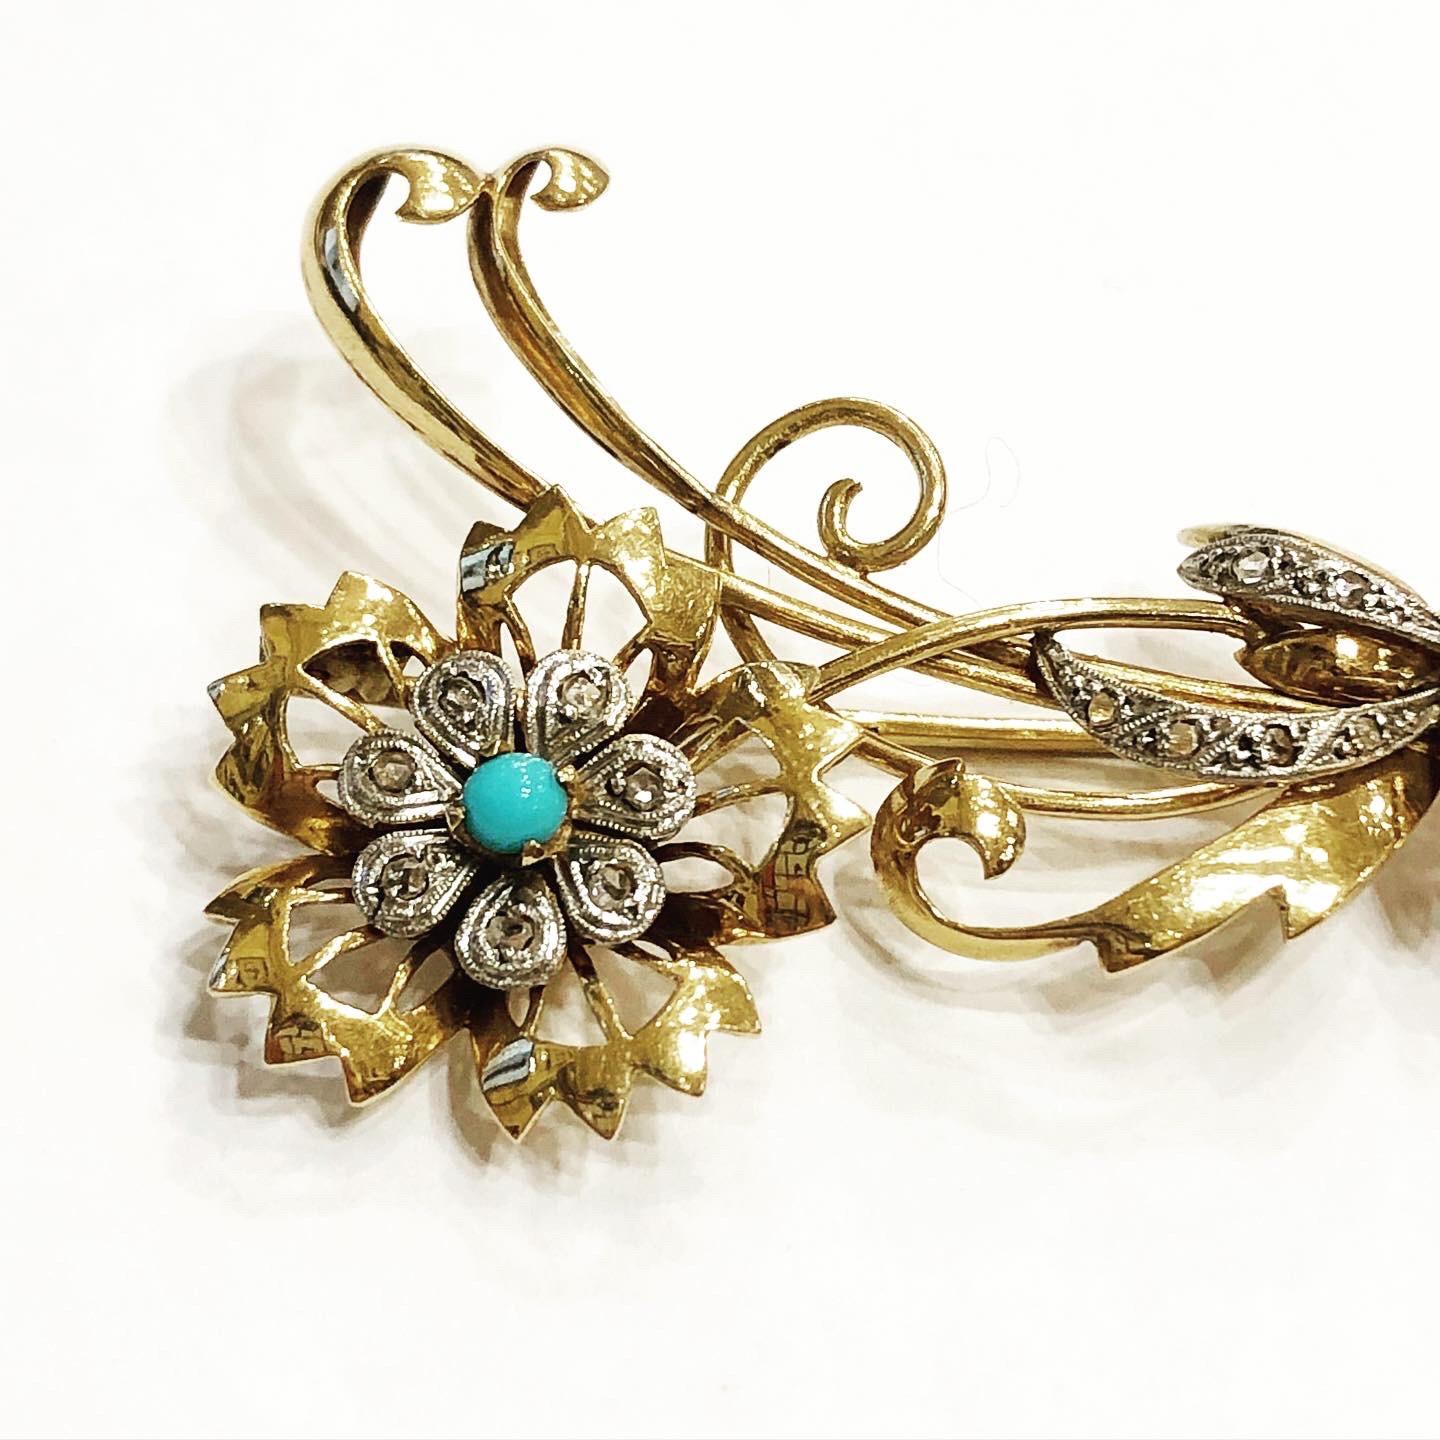 Circa 1940's retro brooch. An artistically designed flowers bouquet. 
Beatiful cabuchon turquoises and old European cut diamonds.
Tank style.
Length:  5.8 cm.
Width: 3.5 cm.
Weith: 9.1 gr.

FREE SHIPPING.
RETURNS ACCEPTED (3 days).

We guarantee you